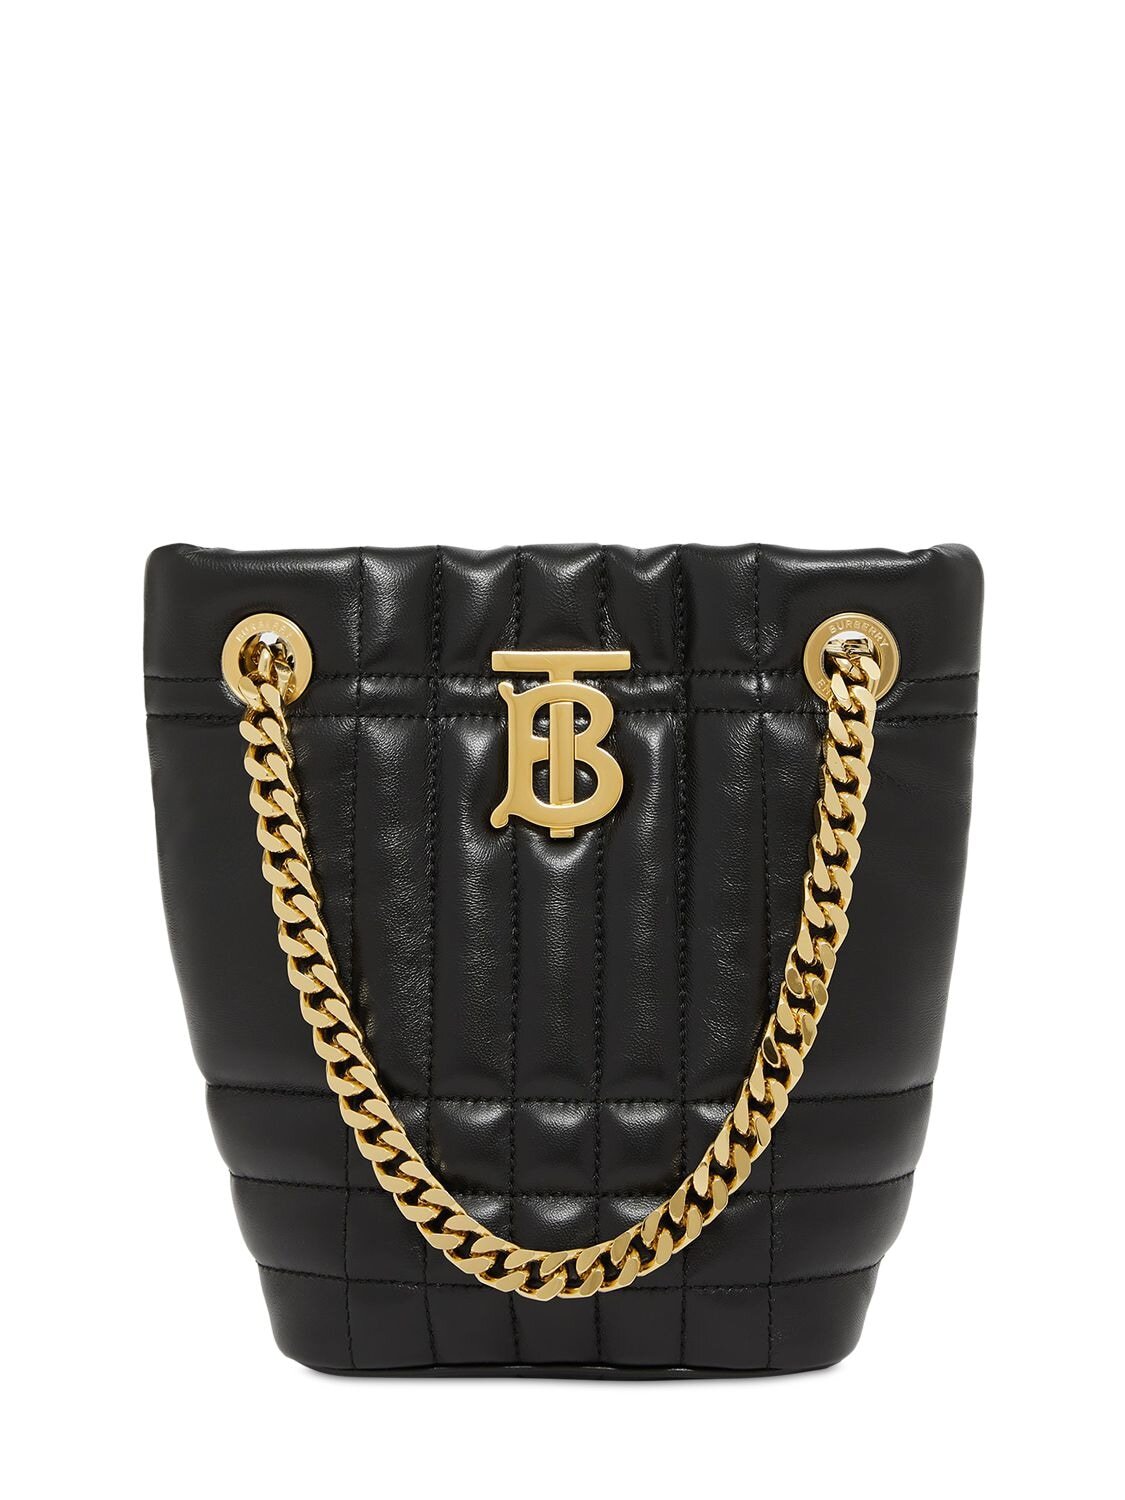 BURBERRY Medium Lola Quilted Leather Bucket Bag in black